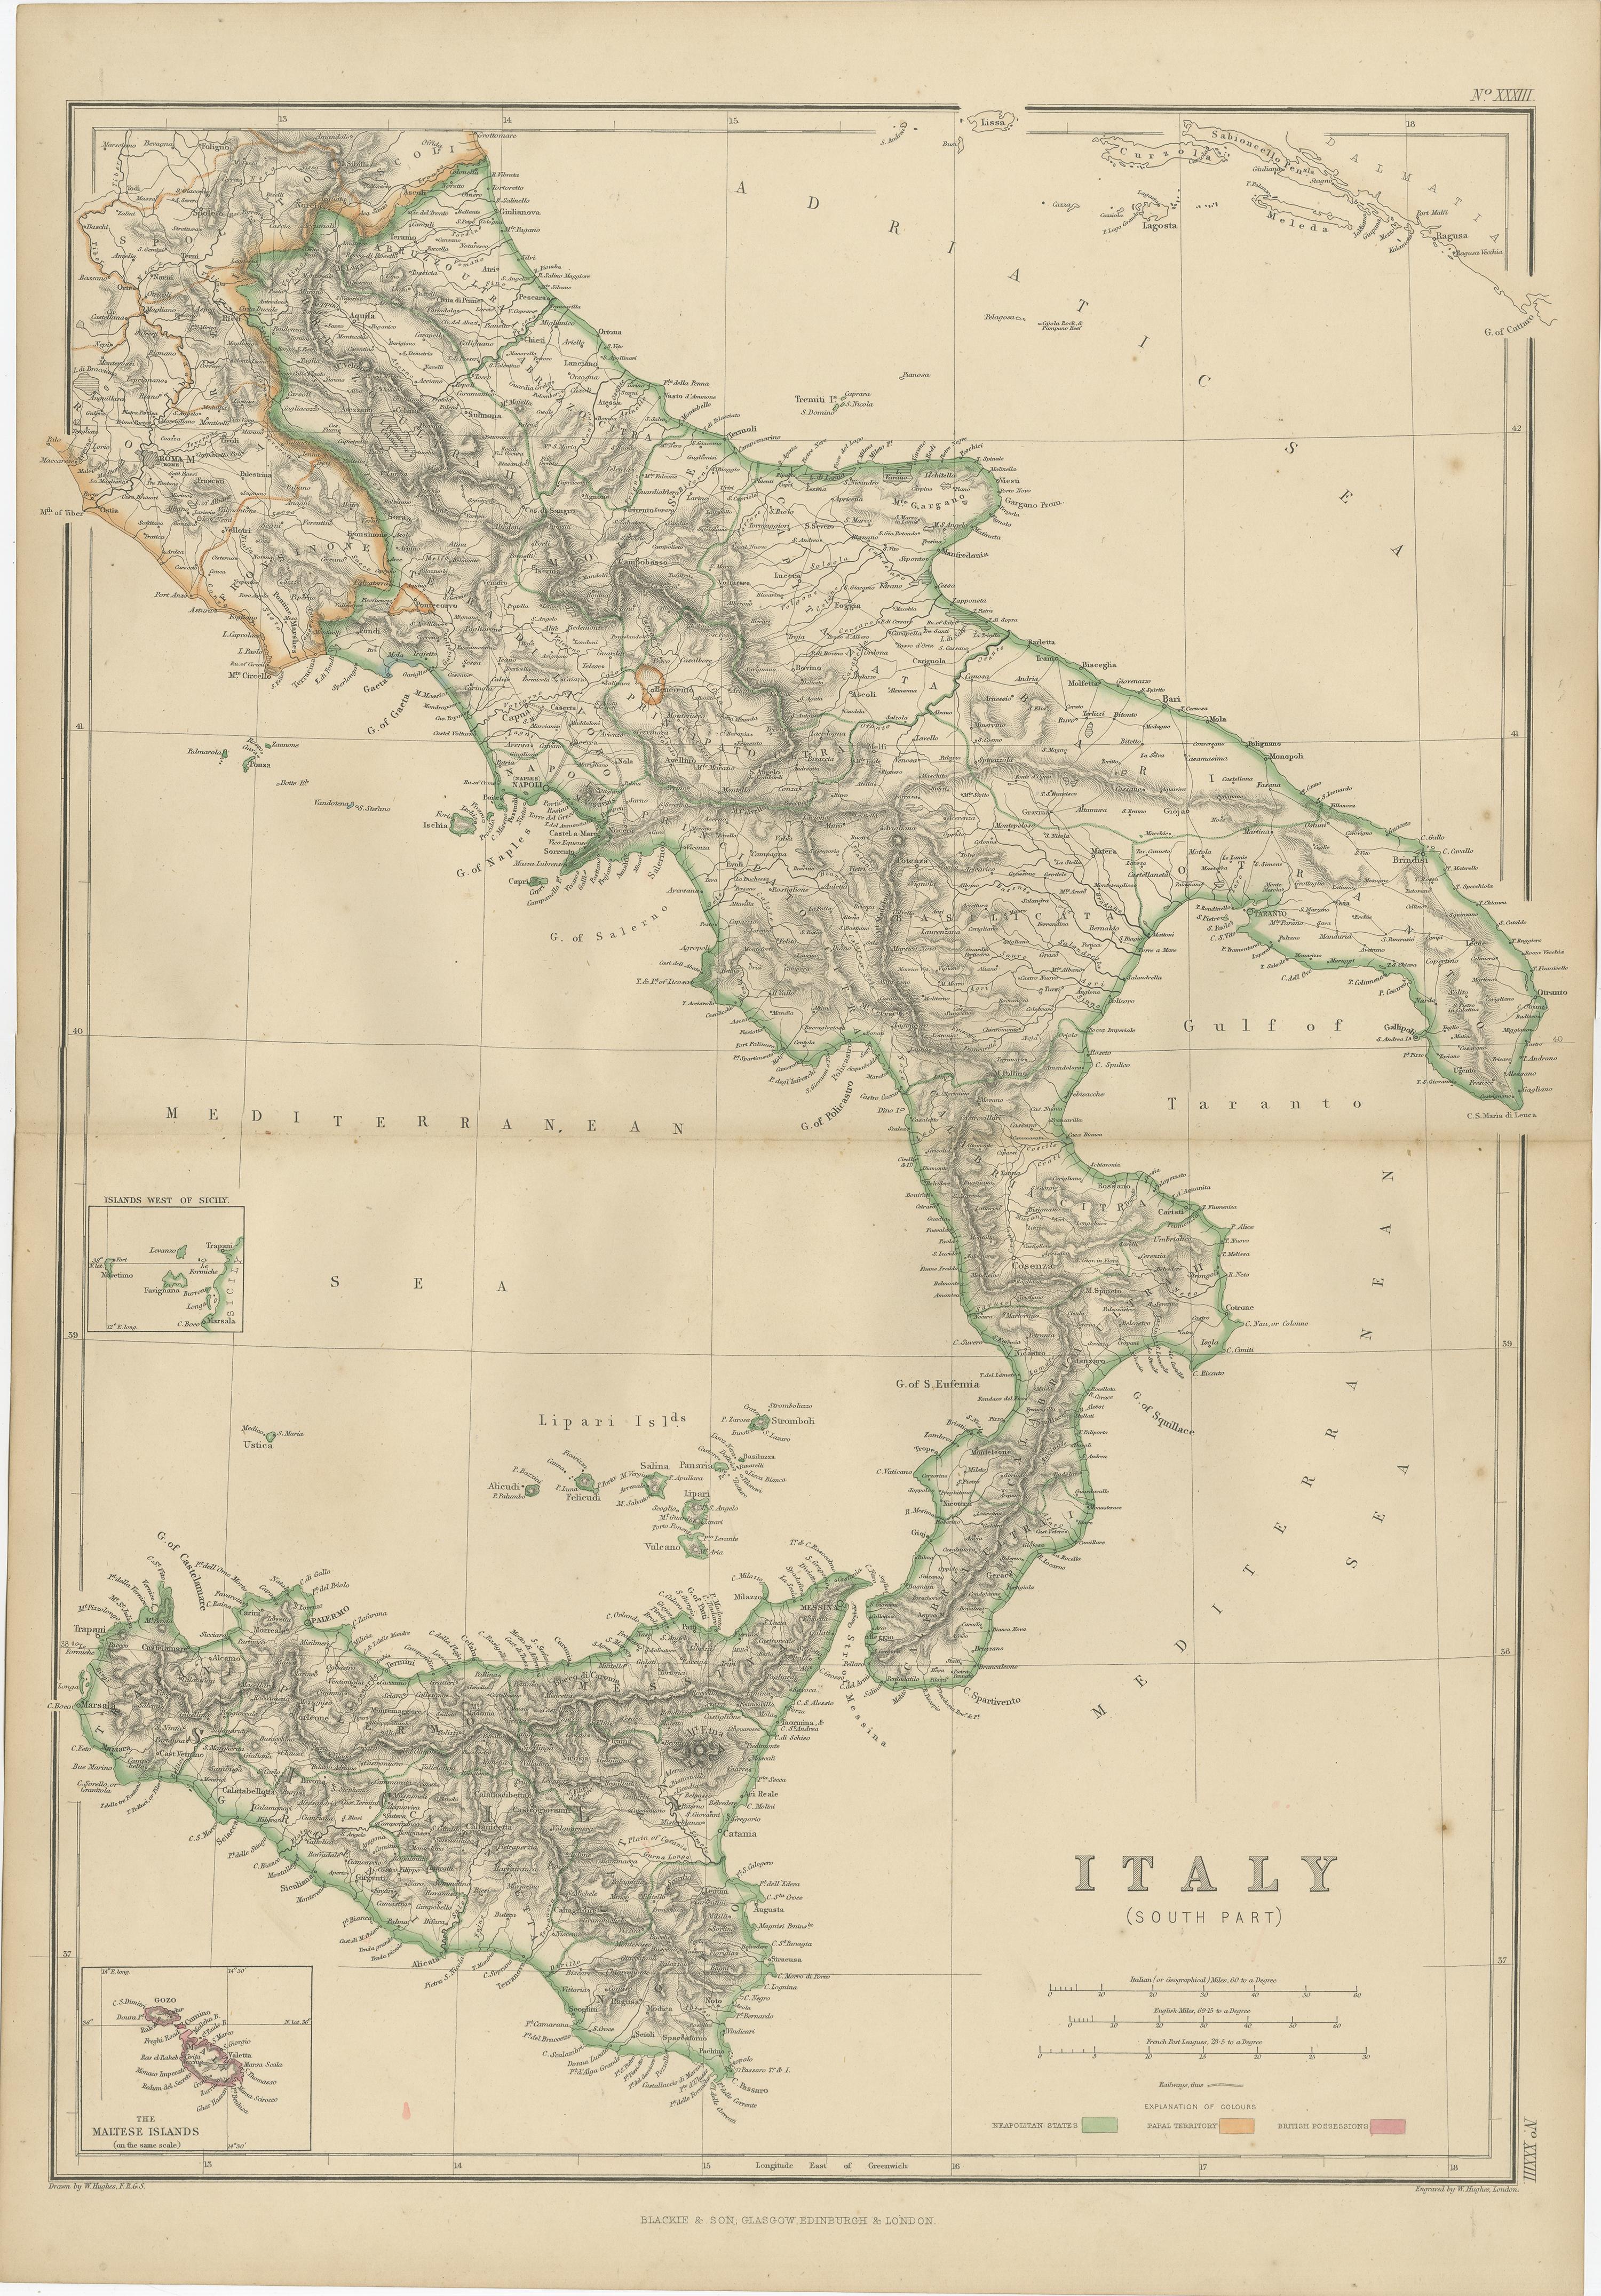 Antique map titled 'Italy South Part'. Original antique map of Italy South Part with inset maps of Malta and Island west of Sicily. This map originates from ‘The Imperial Atlas of Modern Geography’. Published by W. G. Blackie, 1859.